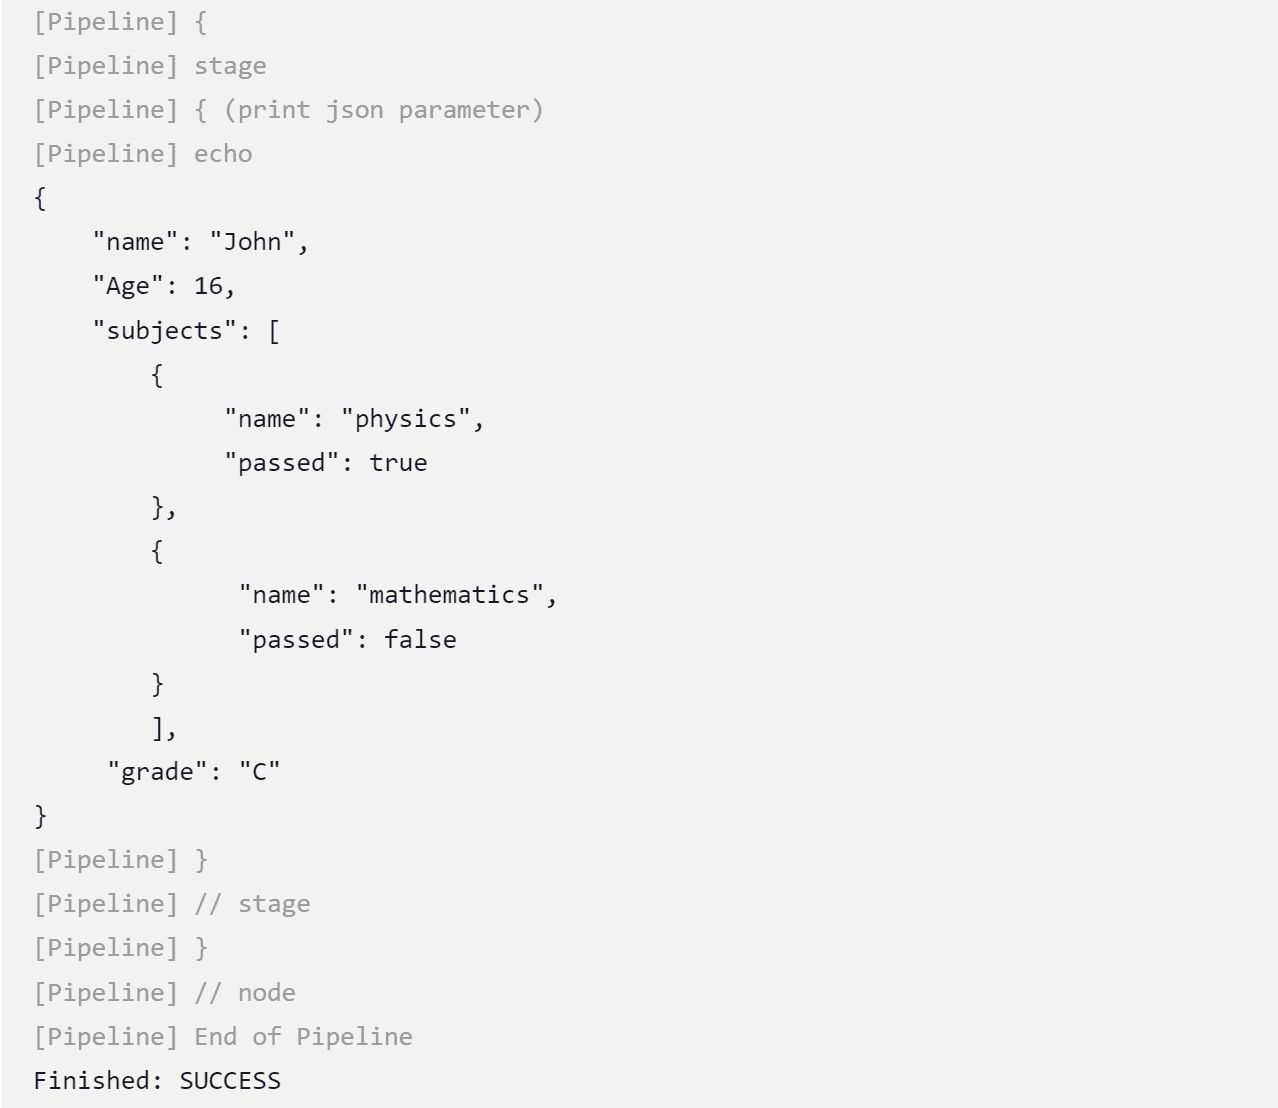 JSON parameter showing in the pipeline output